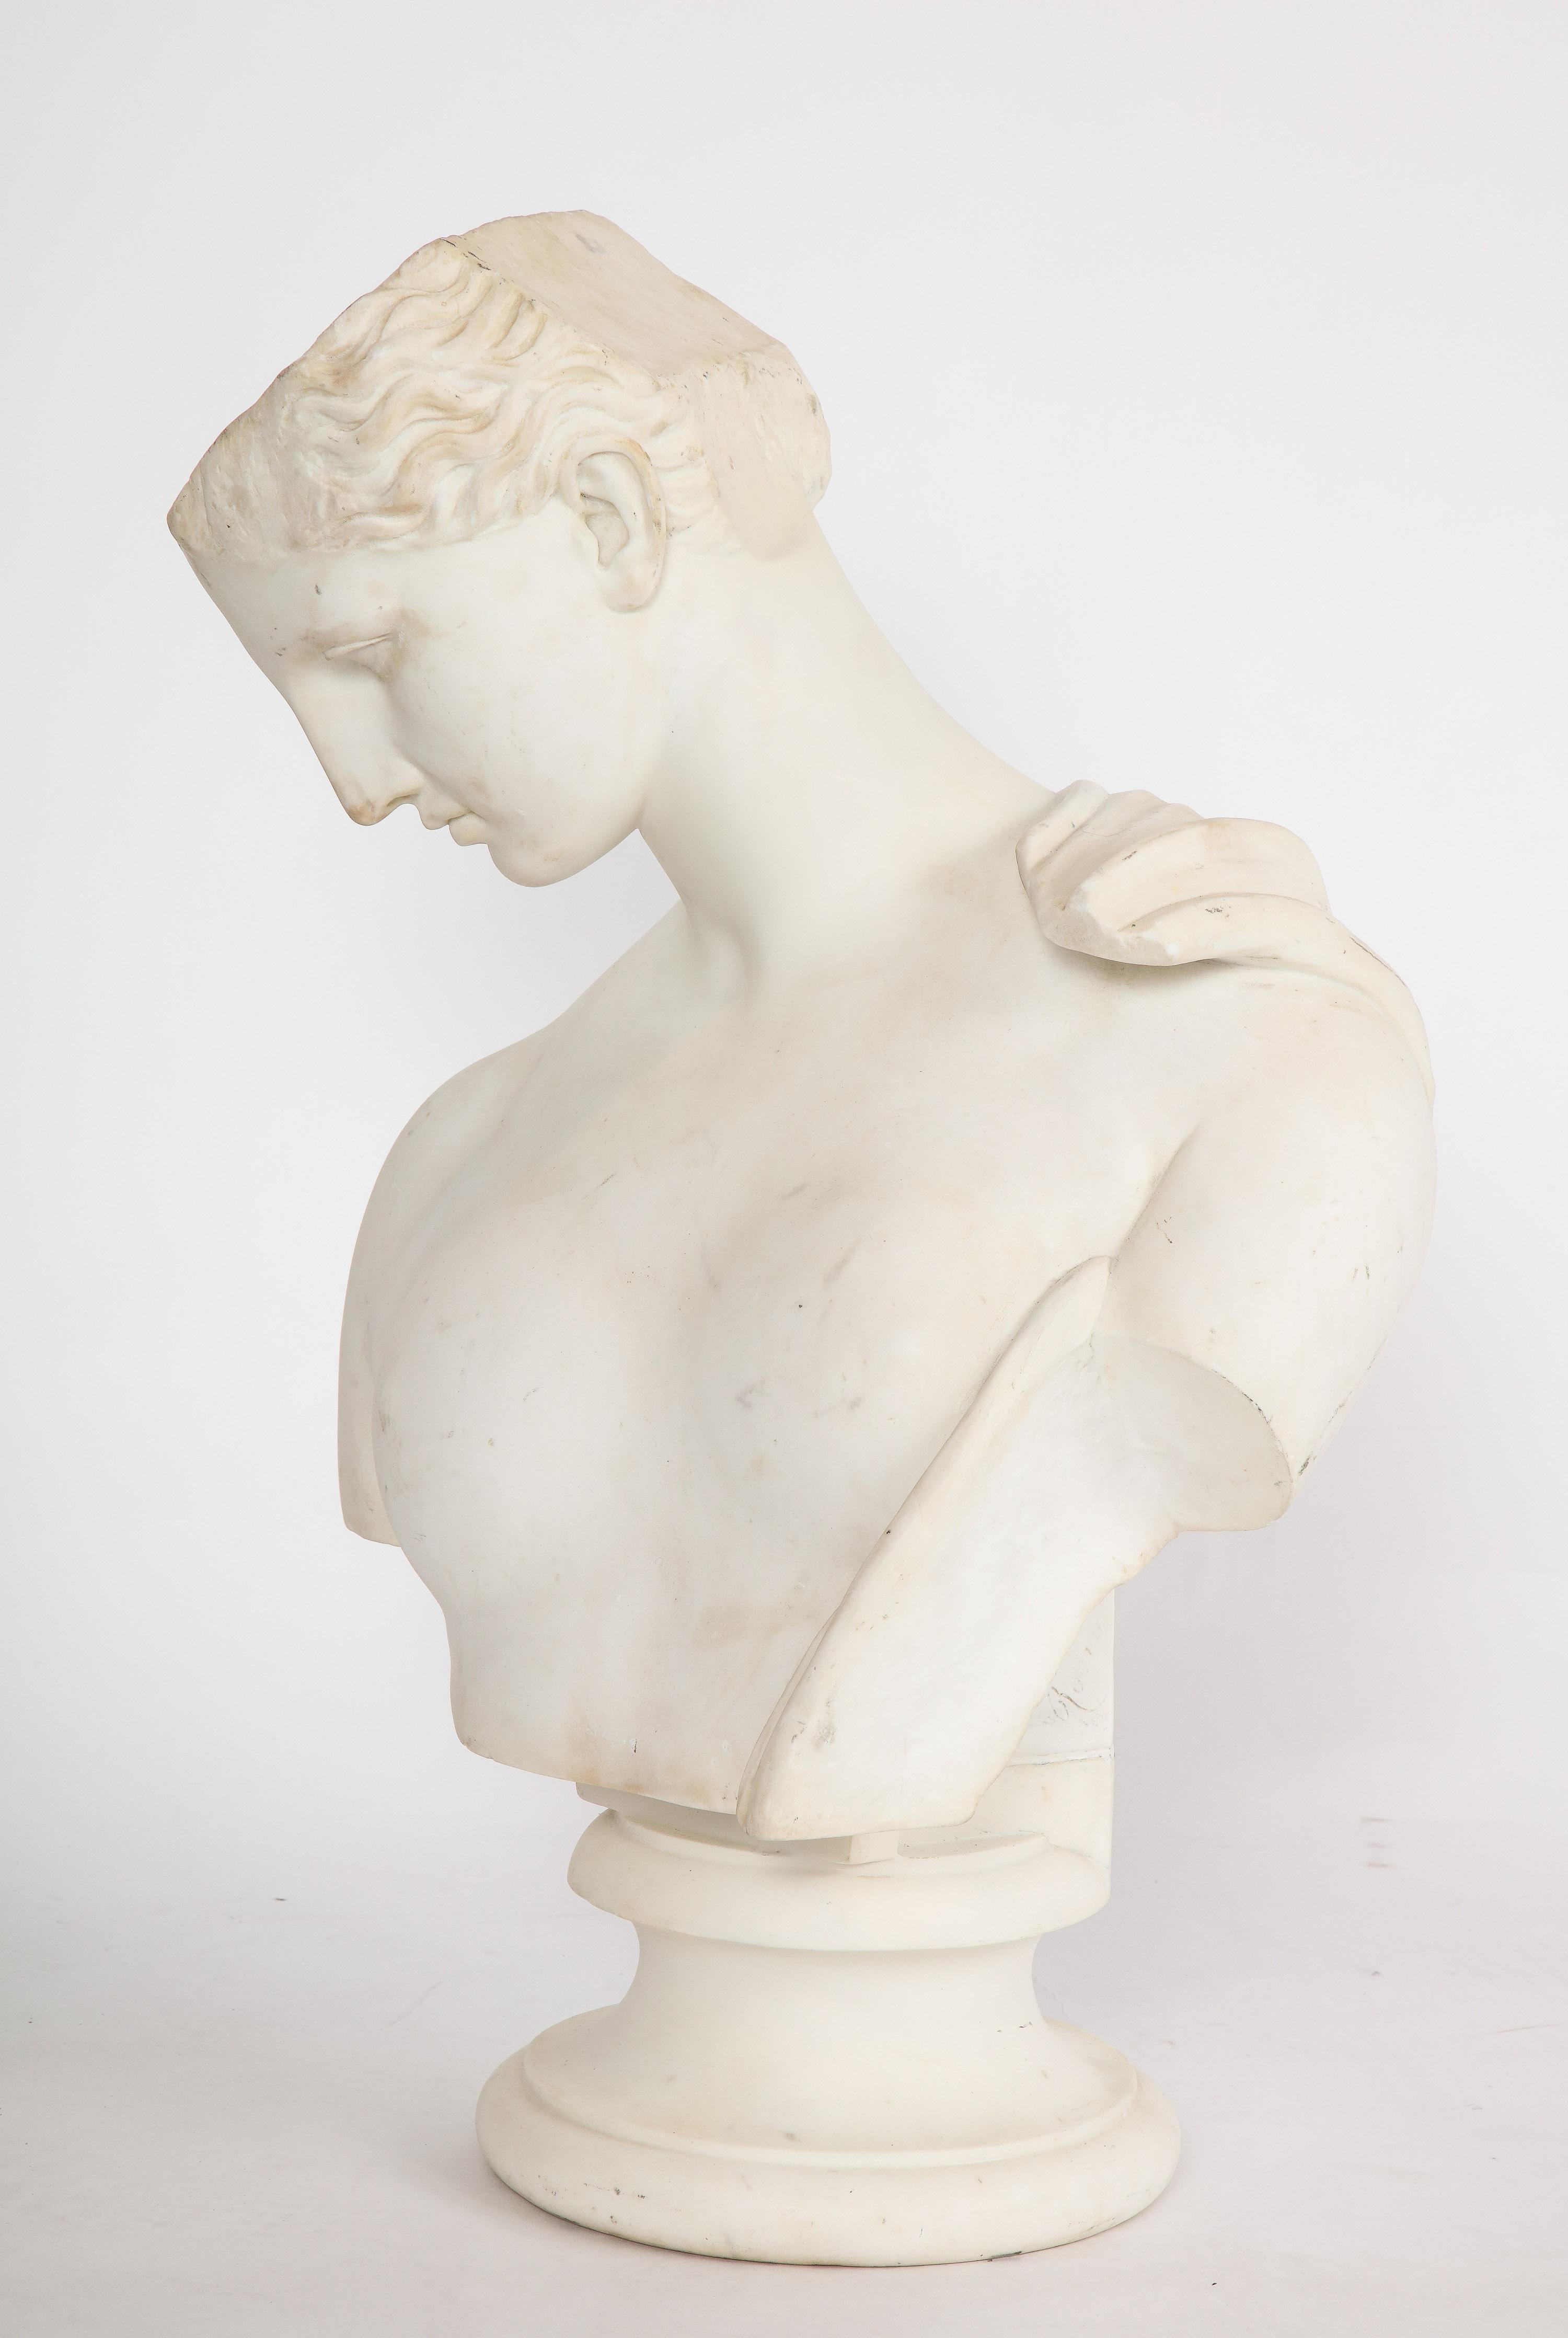 An Antique Italian Neoclassical Marble Bust of Psyche, by Giuseppe Carnevale, Rome, 19th century.

Very decorative bust of a male with half a head Psyche of Capua.

Signed G. Carnevale, with address in Rome.

Good condition. Normal wear consistent